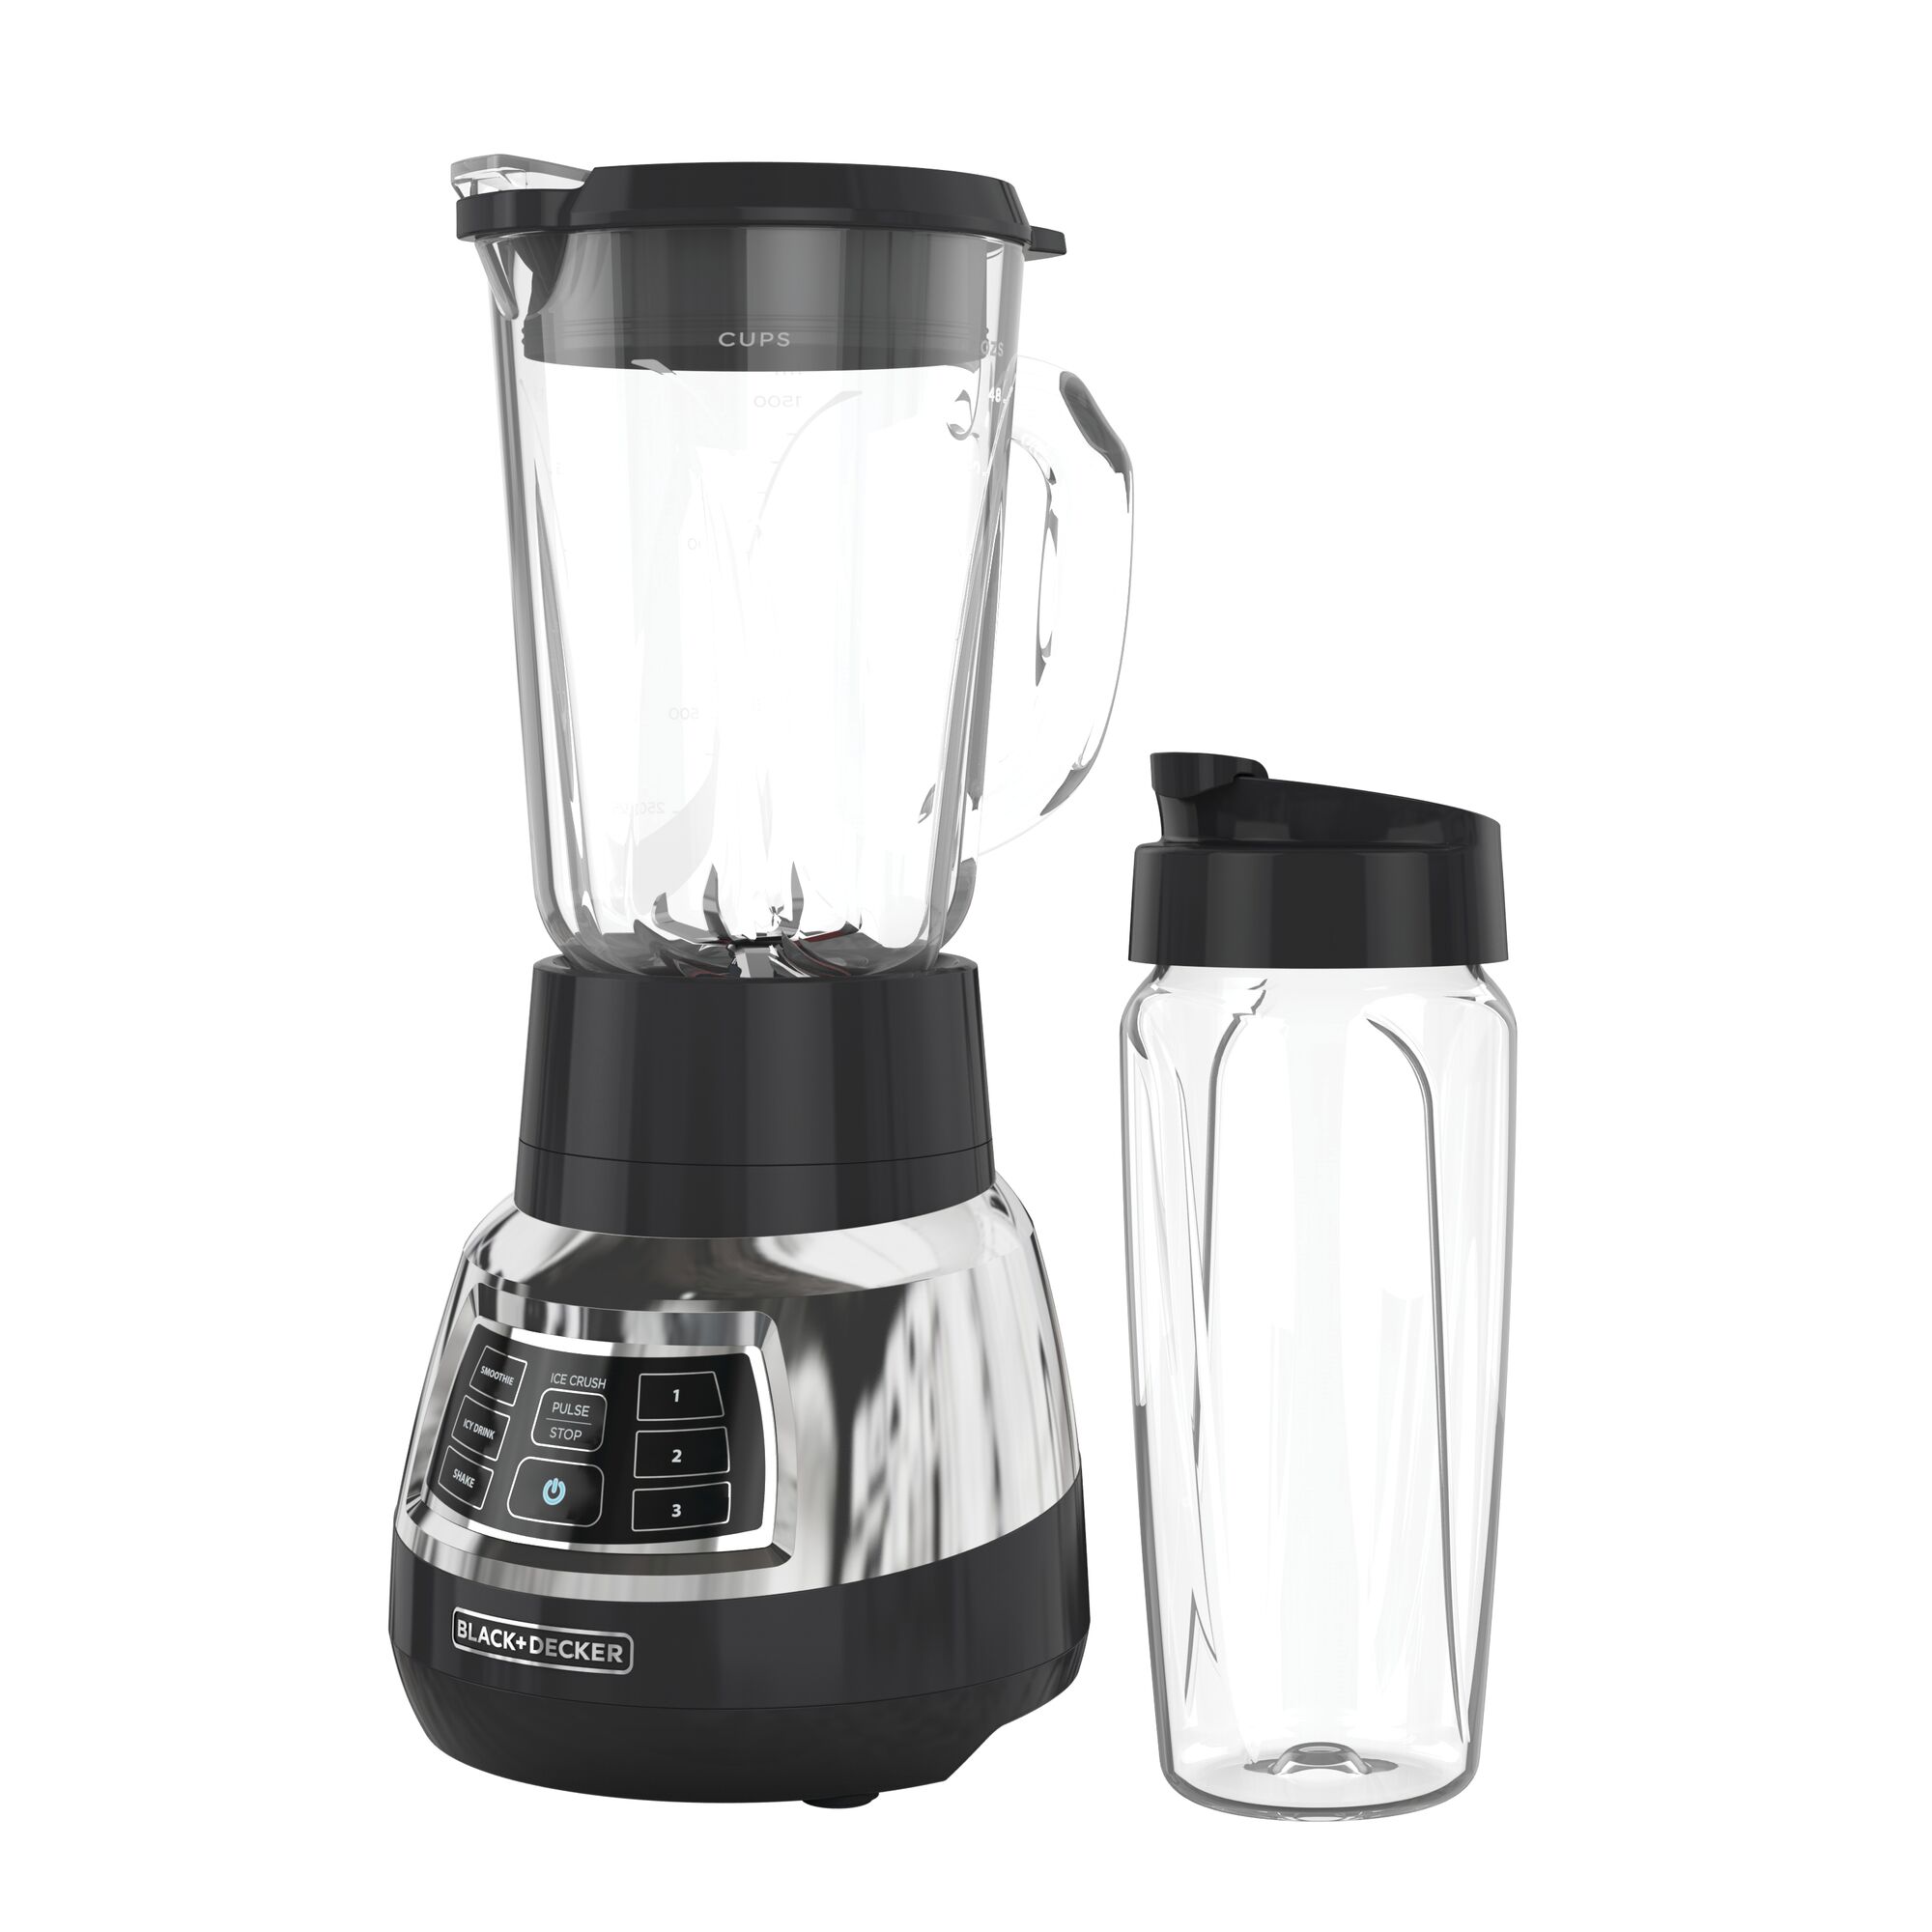 Quiet Blender with Cyclone Glass Jar.